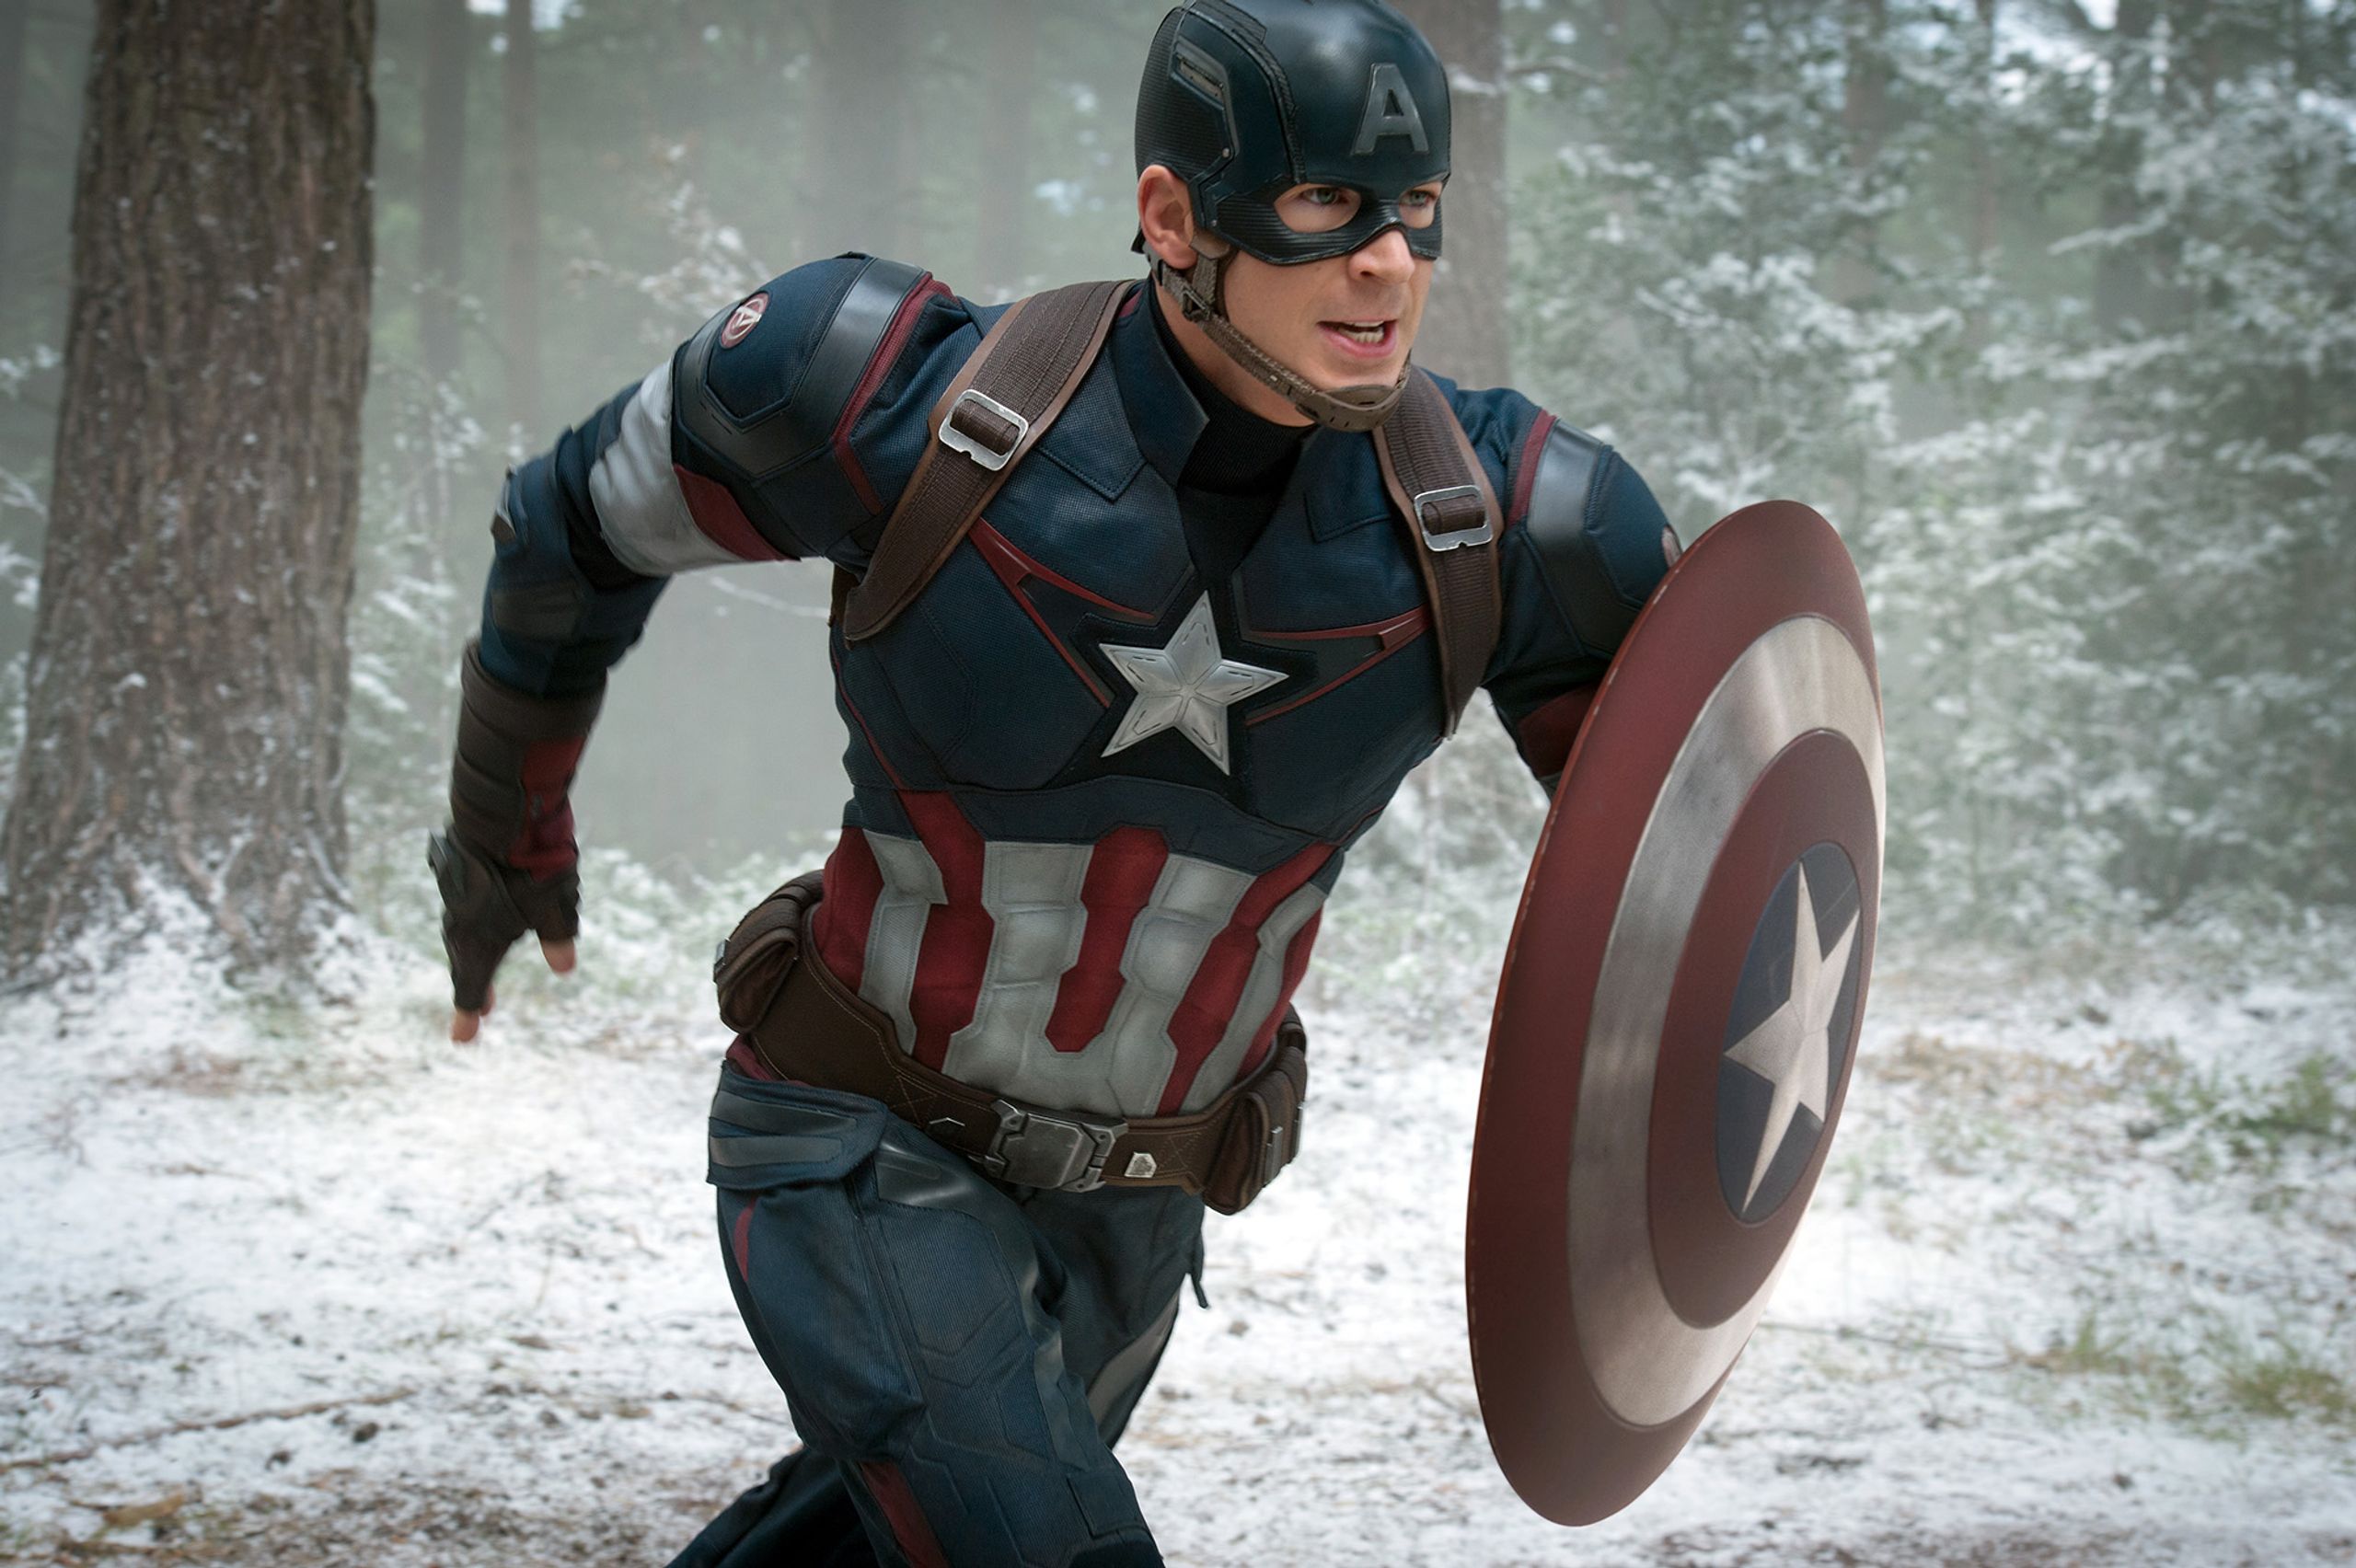 Chris Evans on becoming Captain America: ‘Was terrified, Went to therapy’